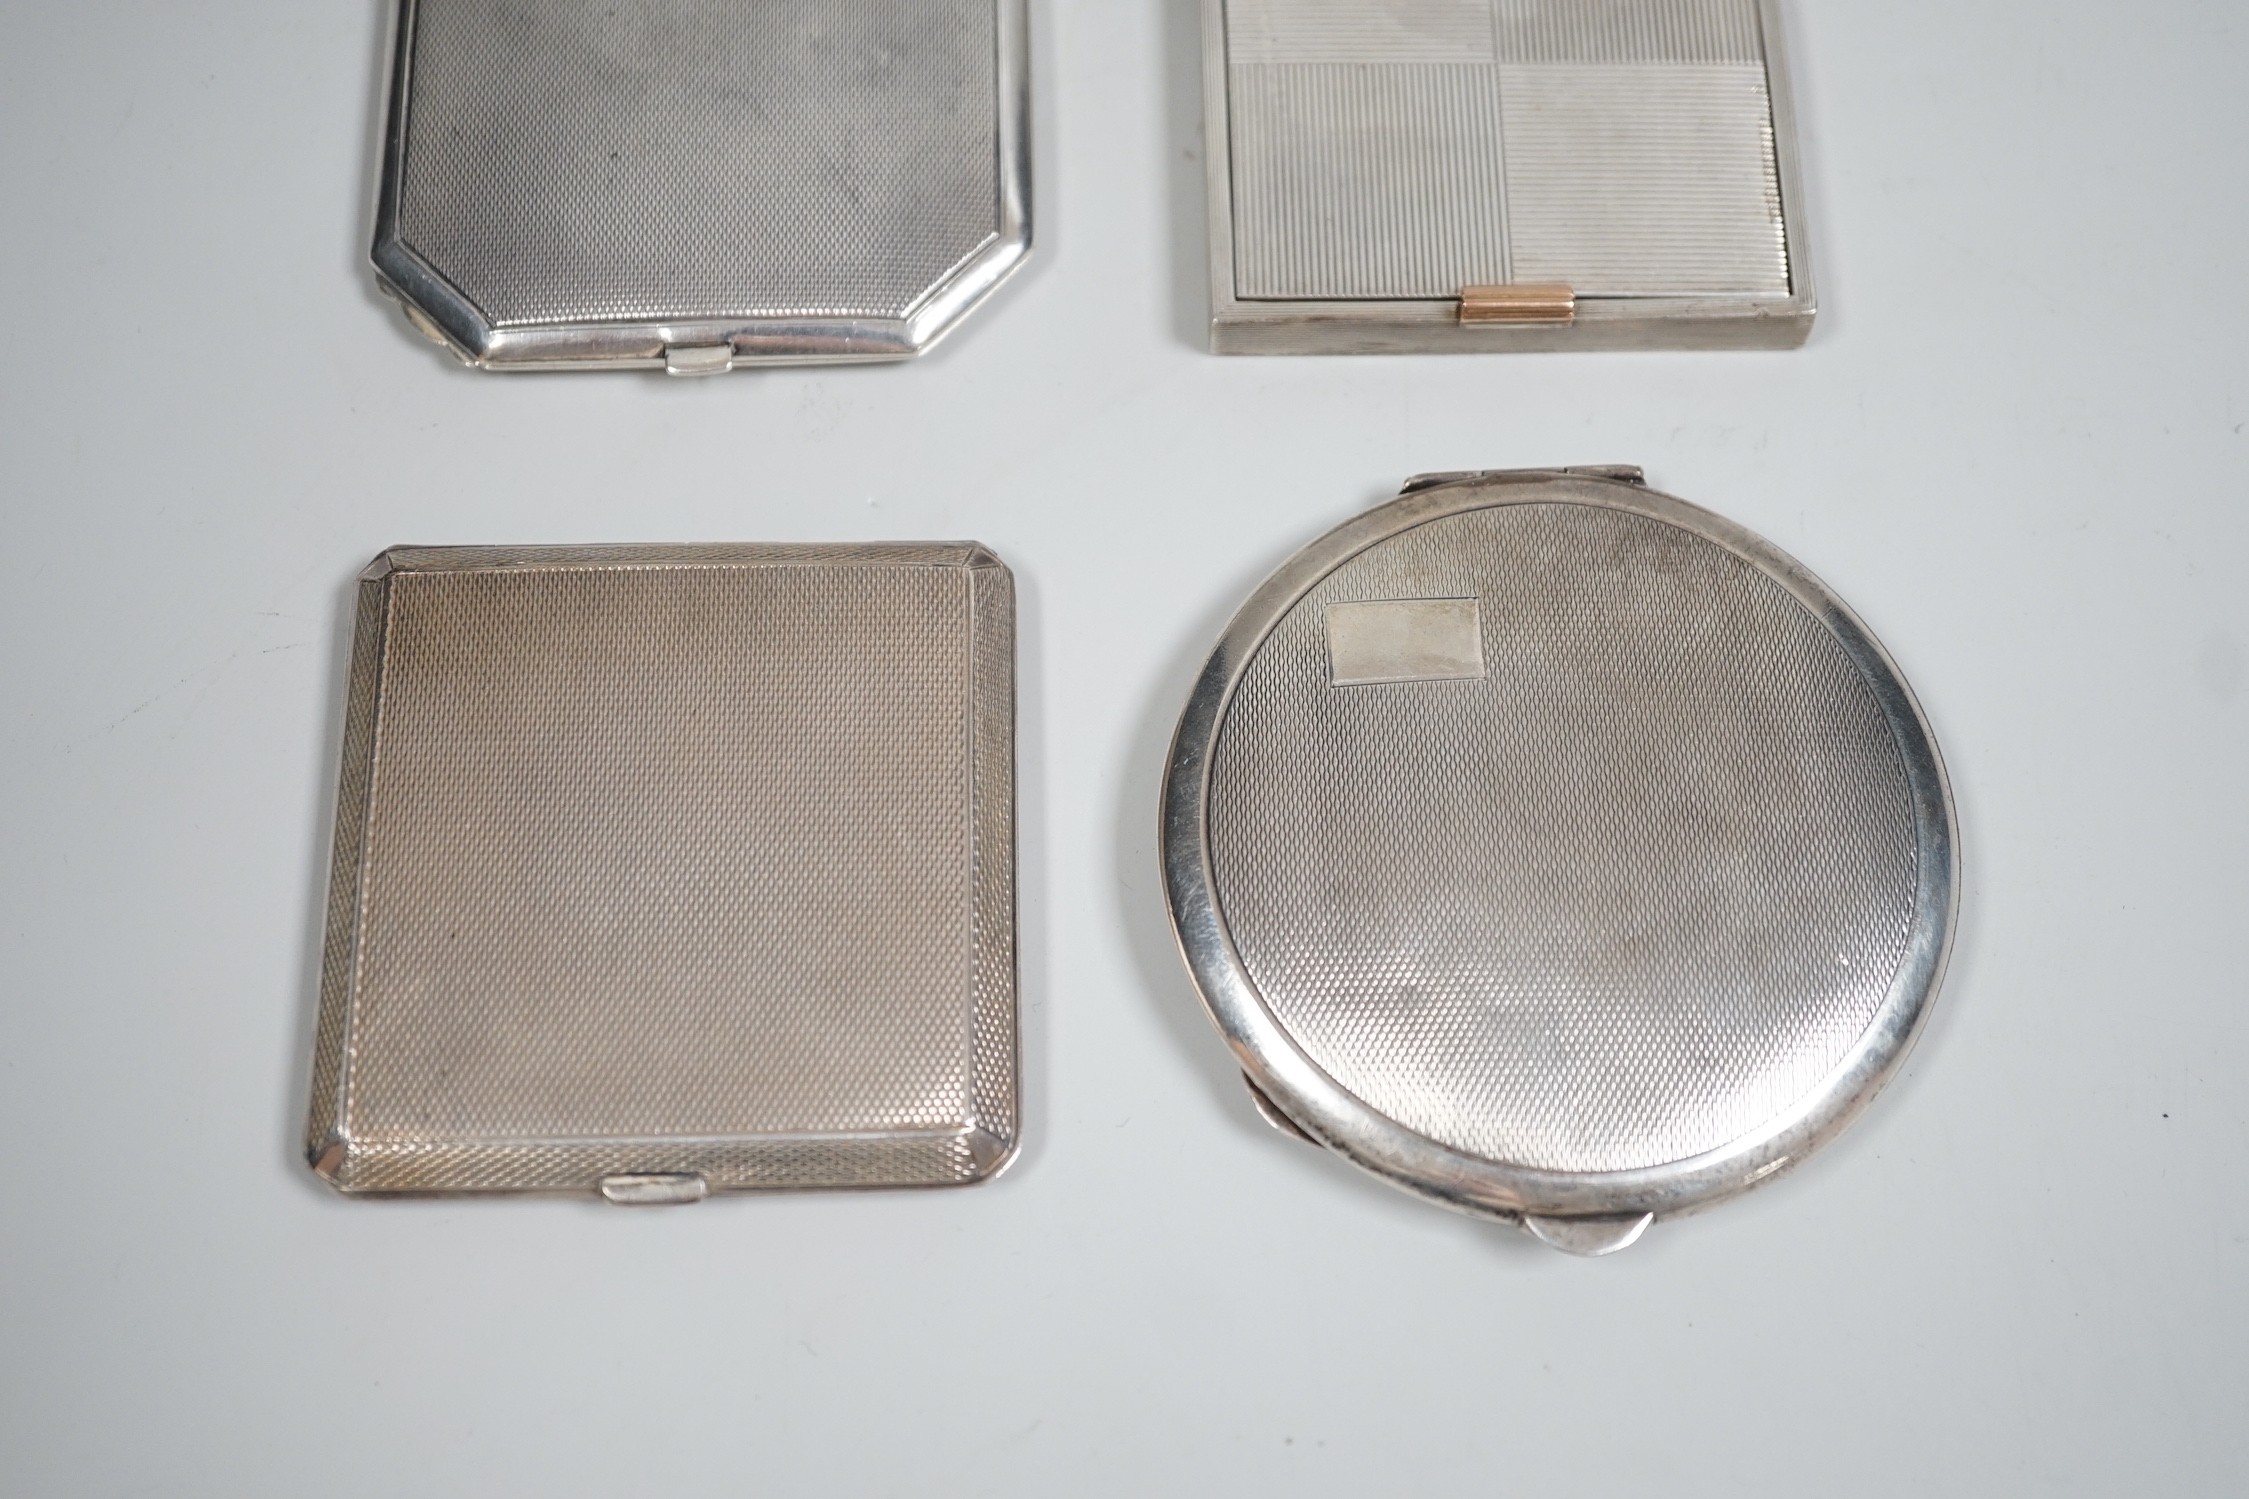 A George V Art Deco silver cigarette case, David Sutton & Sons, London, 1935, 65mm, with leather carrying case, together with three engine turned silver compacts.